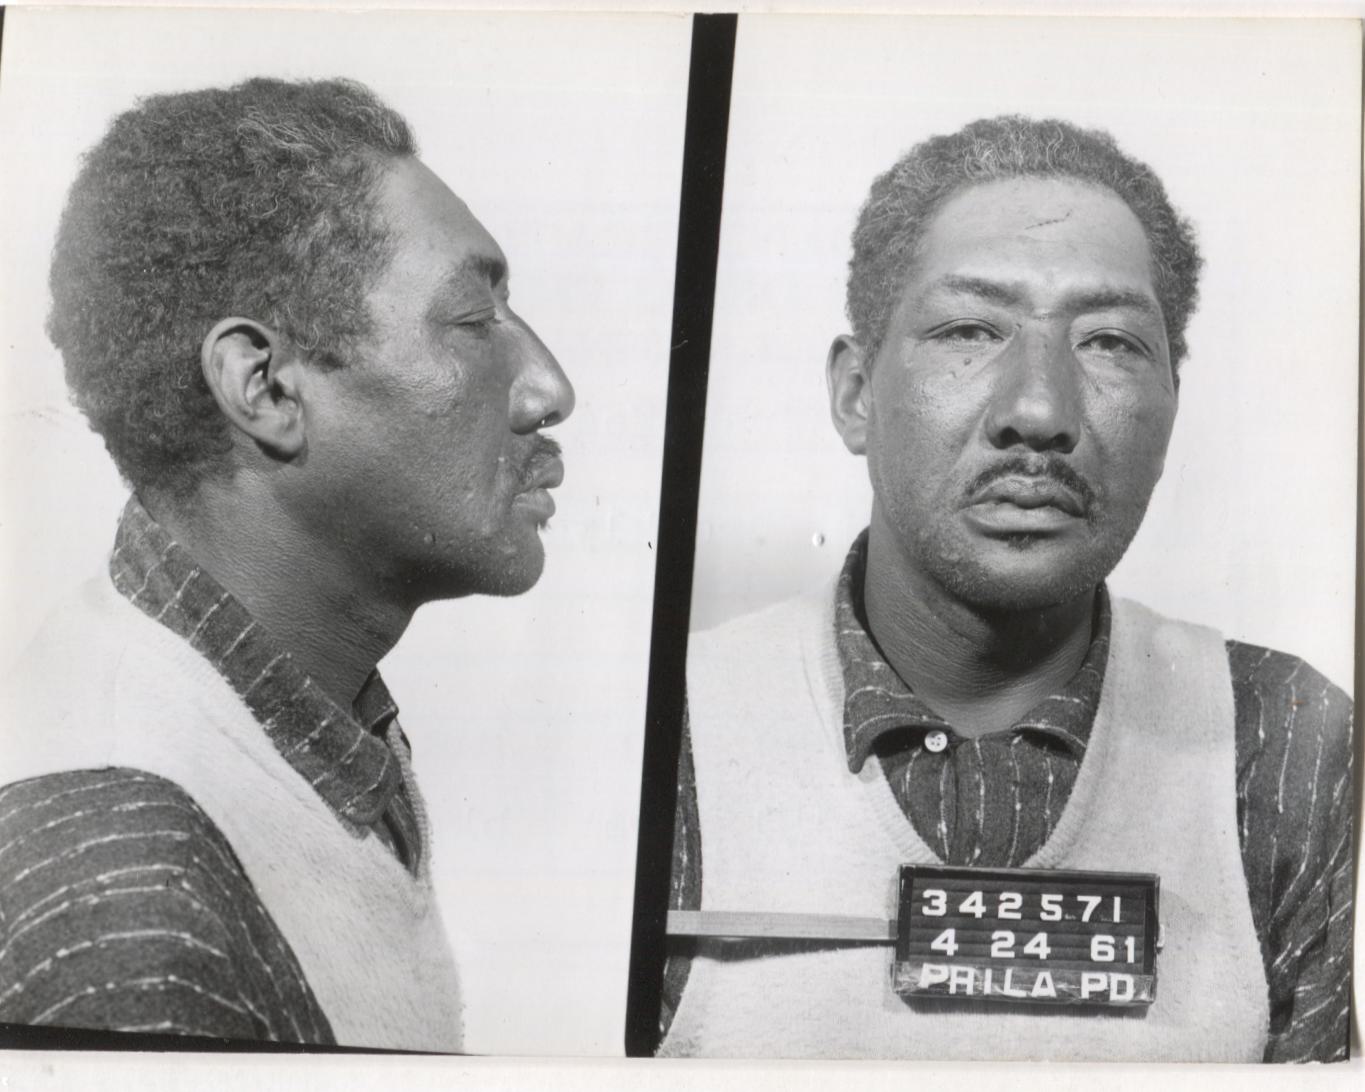 Perry Wren Heath Mugshot - Arrested on 4/24/1961 for Illegal Lottery